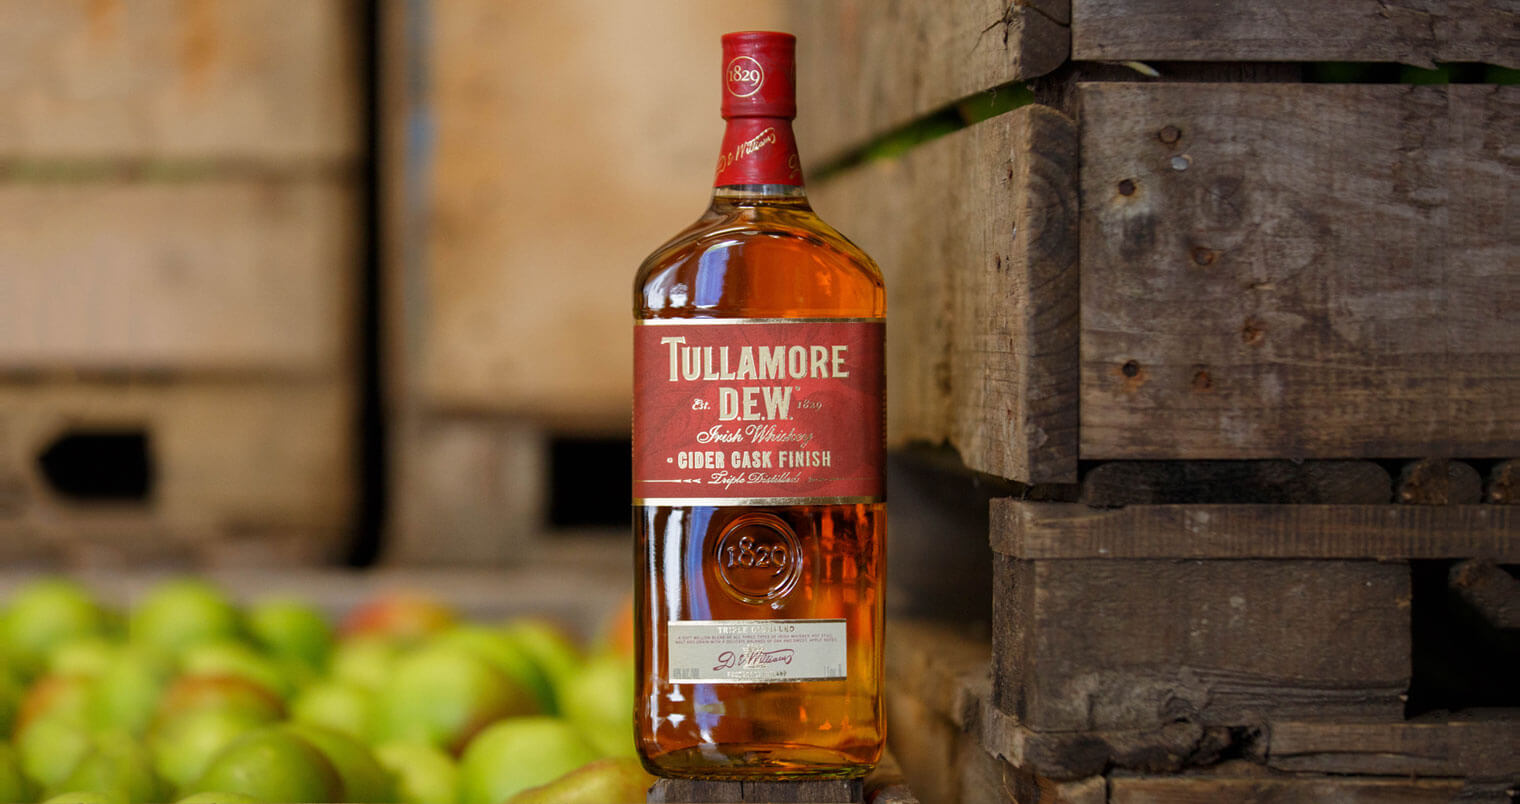 Tullamore D.E.W. Irish Whiskey Launches Cider Cask in the U.S., featured image